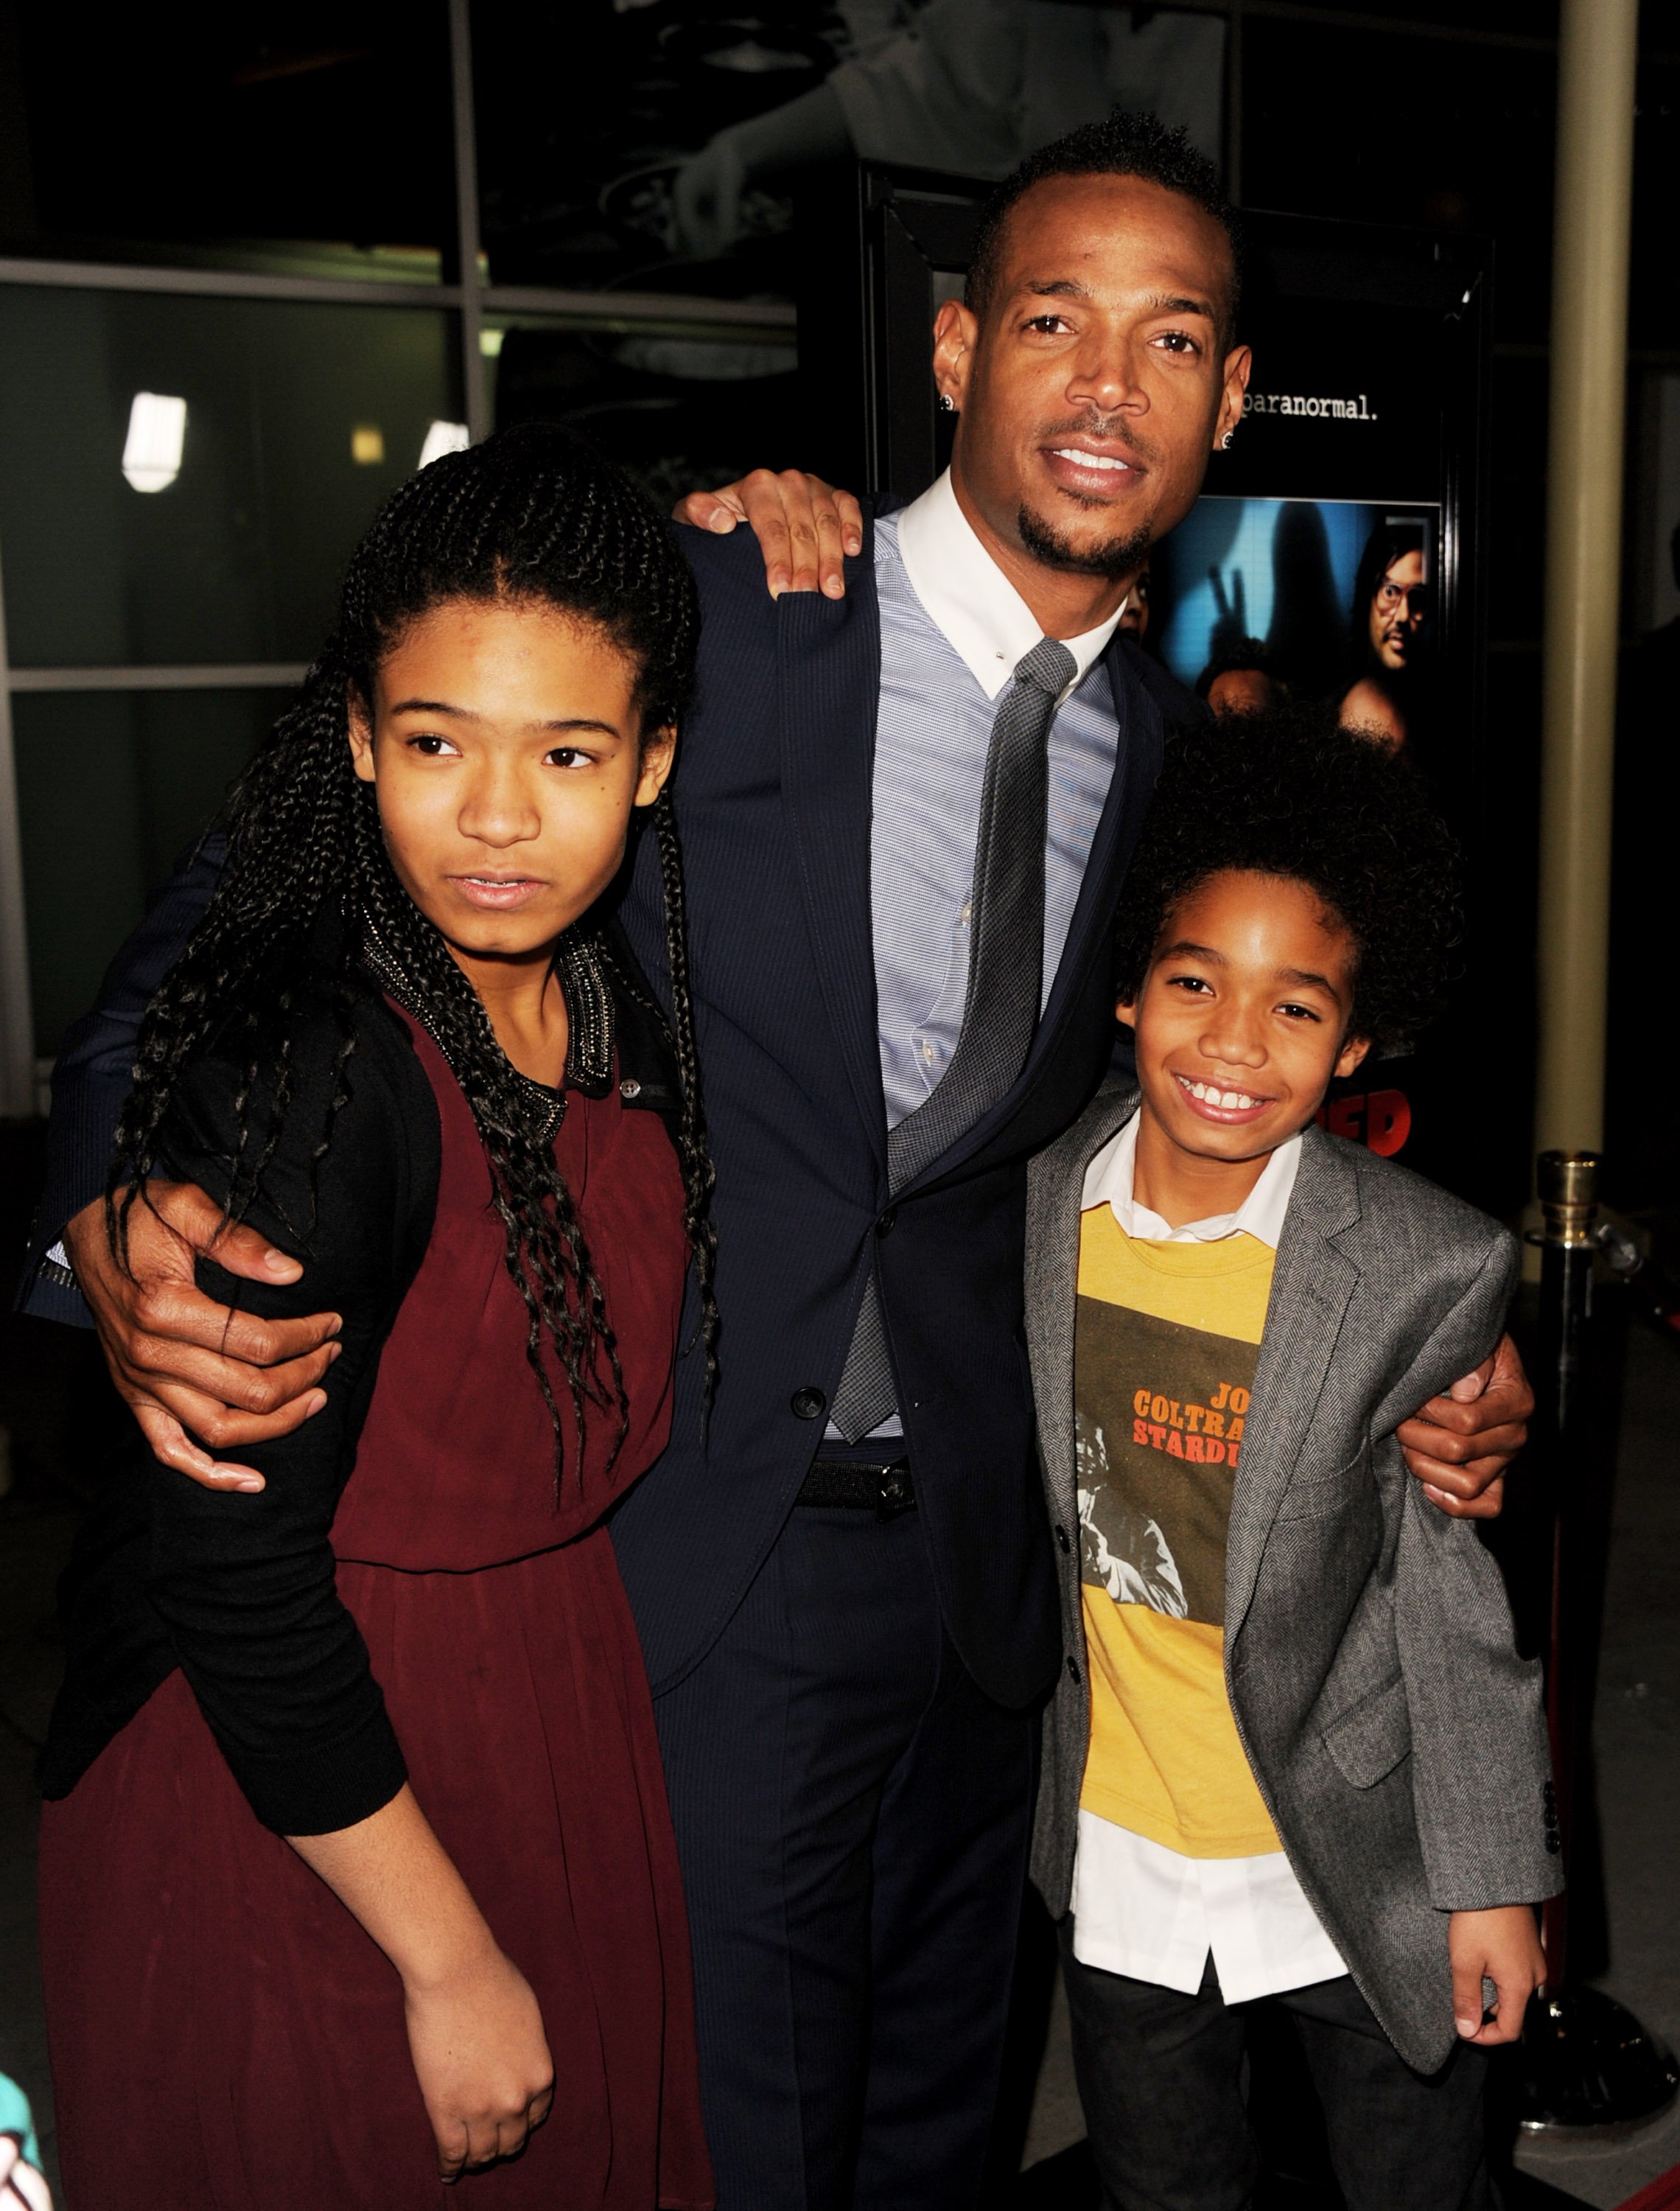 Marlon Wayans and his daughter Amai and son Shawn pose at the premiere of Open Road Films' "A Haunted House" on January 3, 2013, in Los Angeles, California. | Source: Getty Images